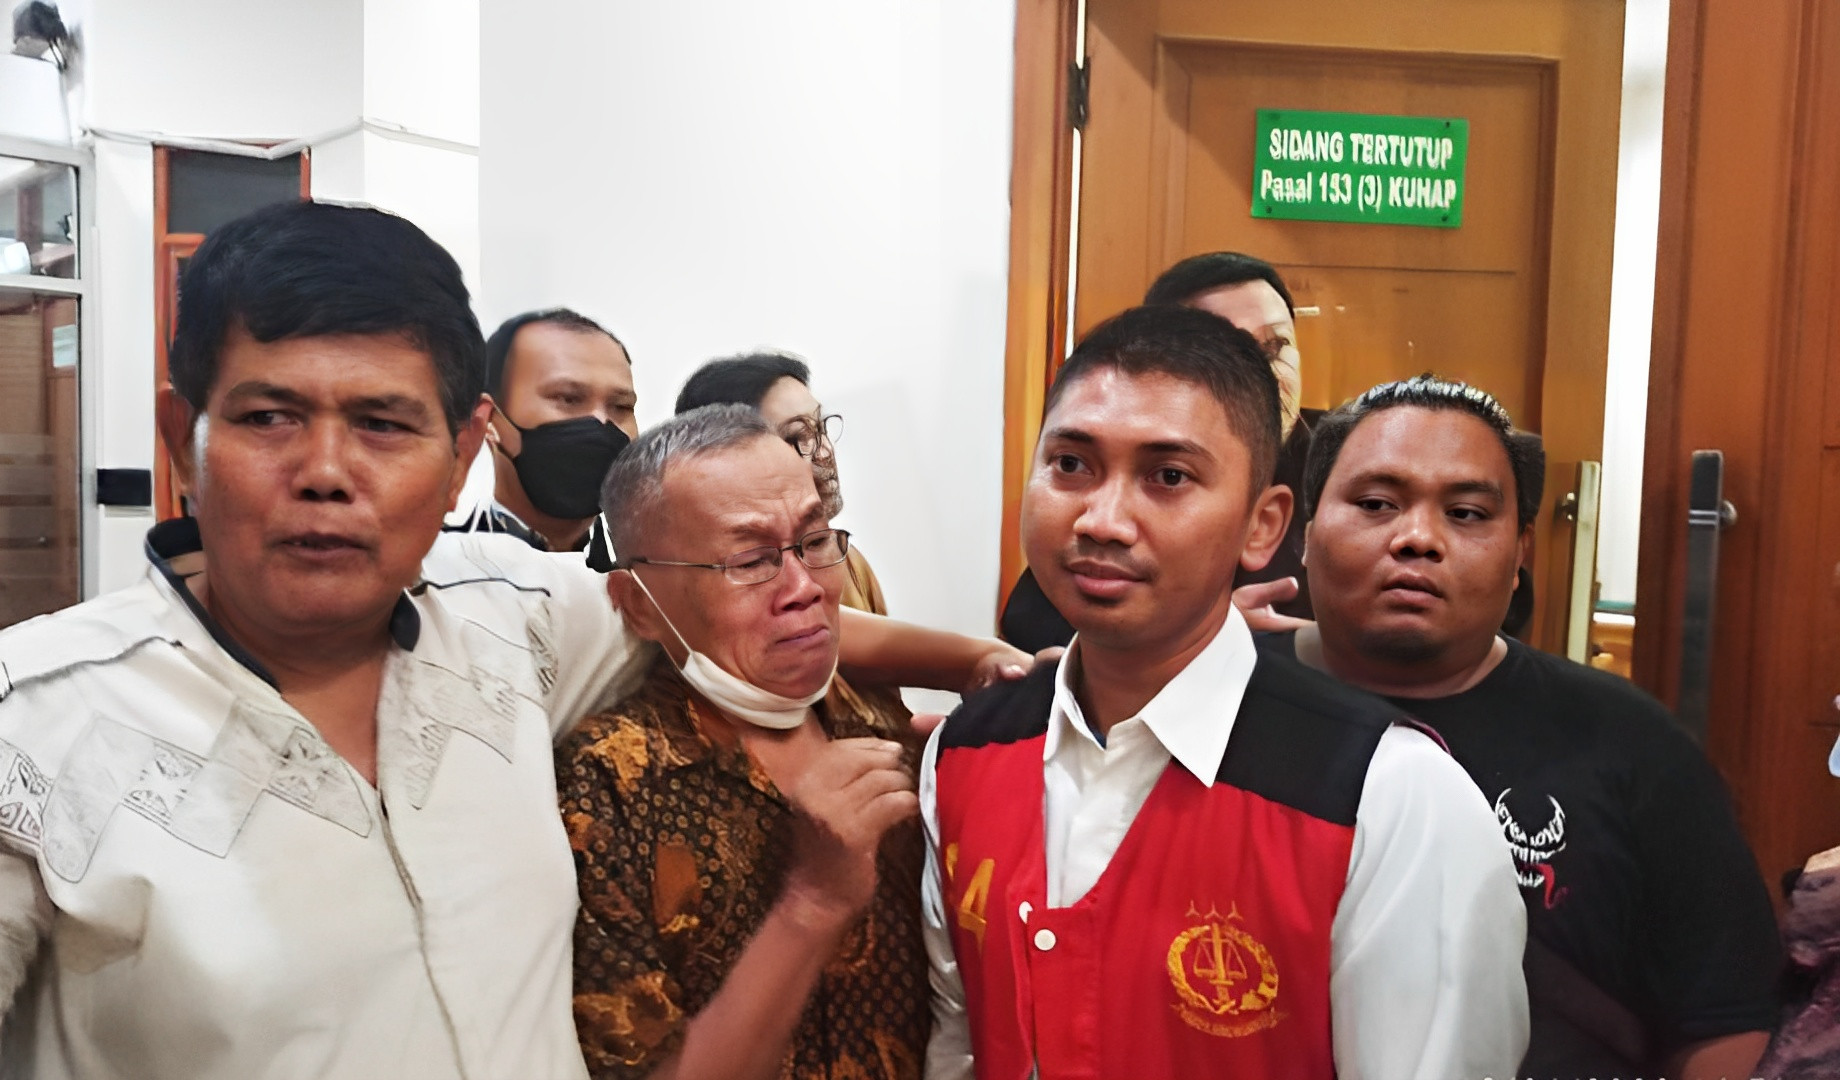 Nugroho (in the red vest) is now in jail while awaiting trial at the South Jakarta District Court. Photo: Handout